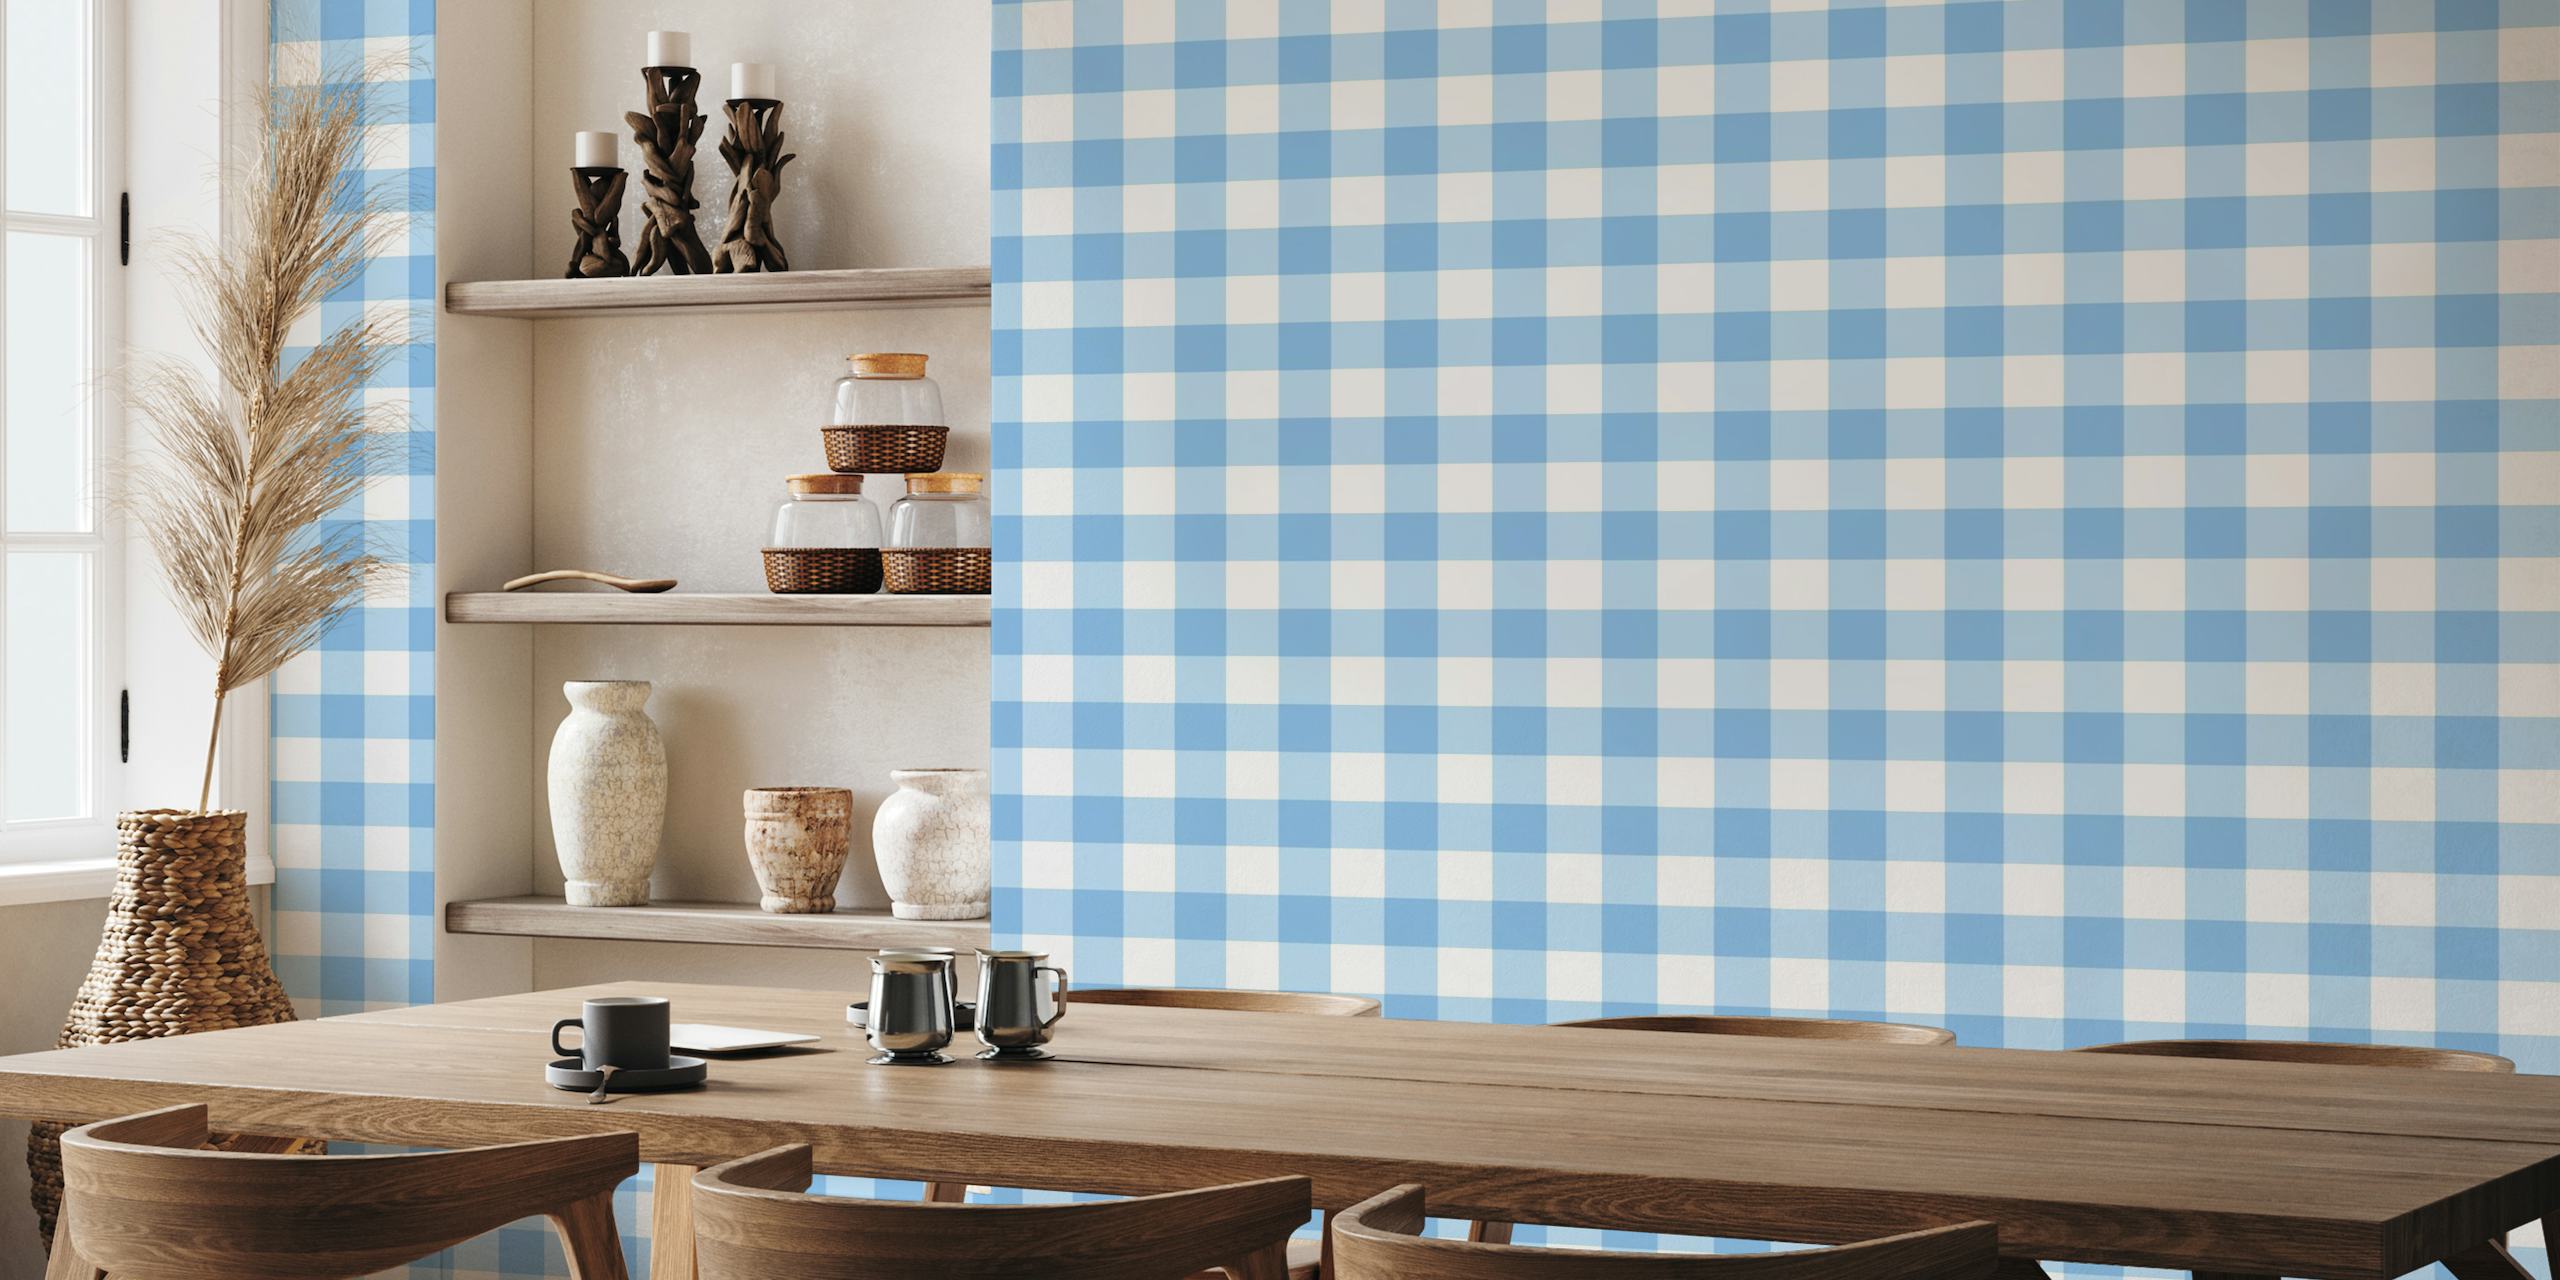 Pale blue and white square patterned wall mural